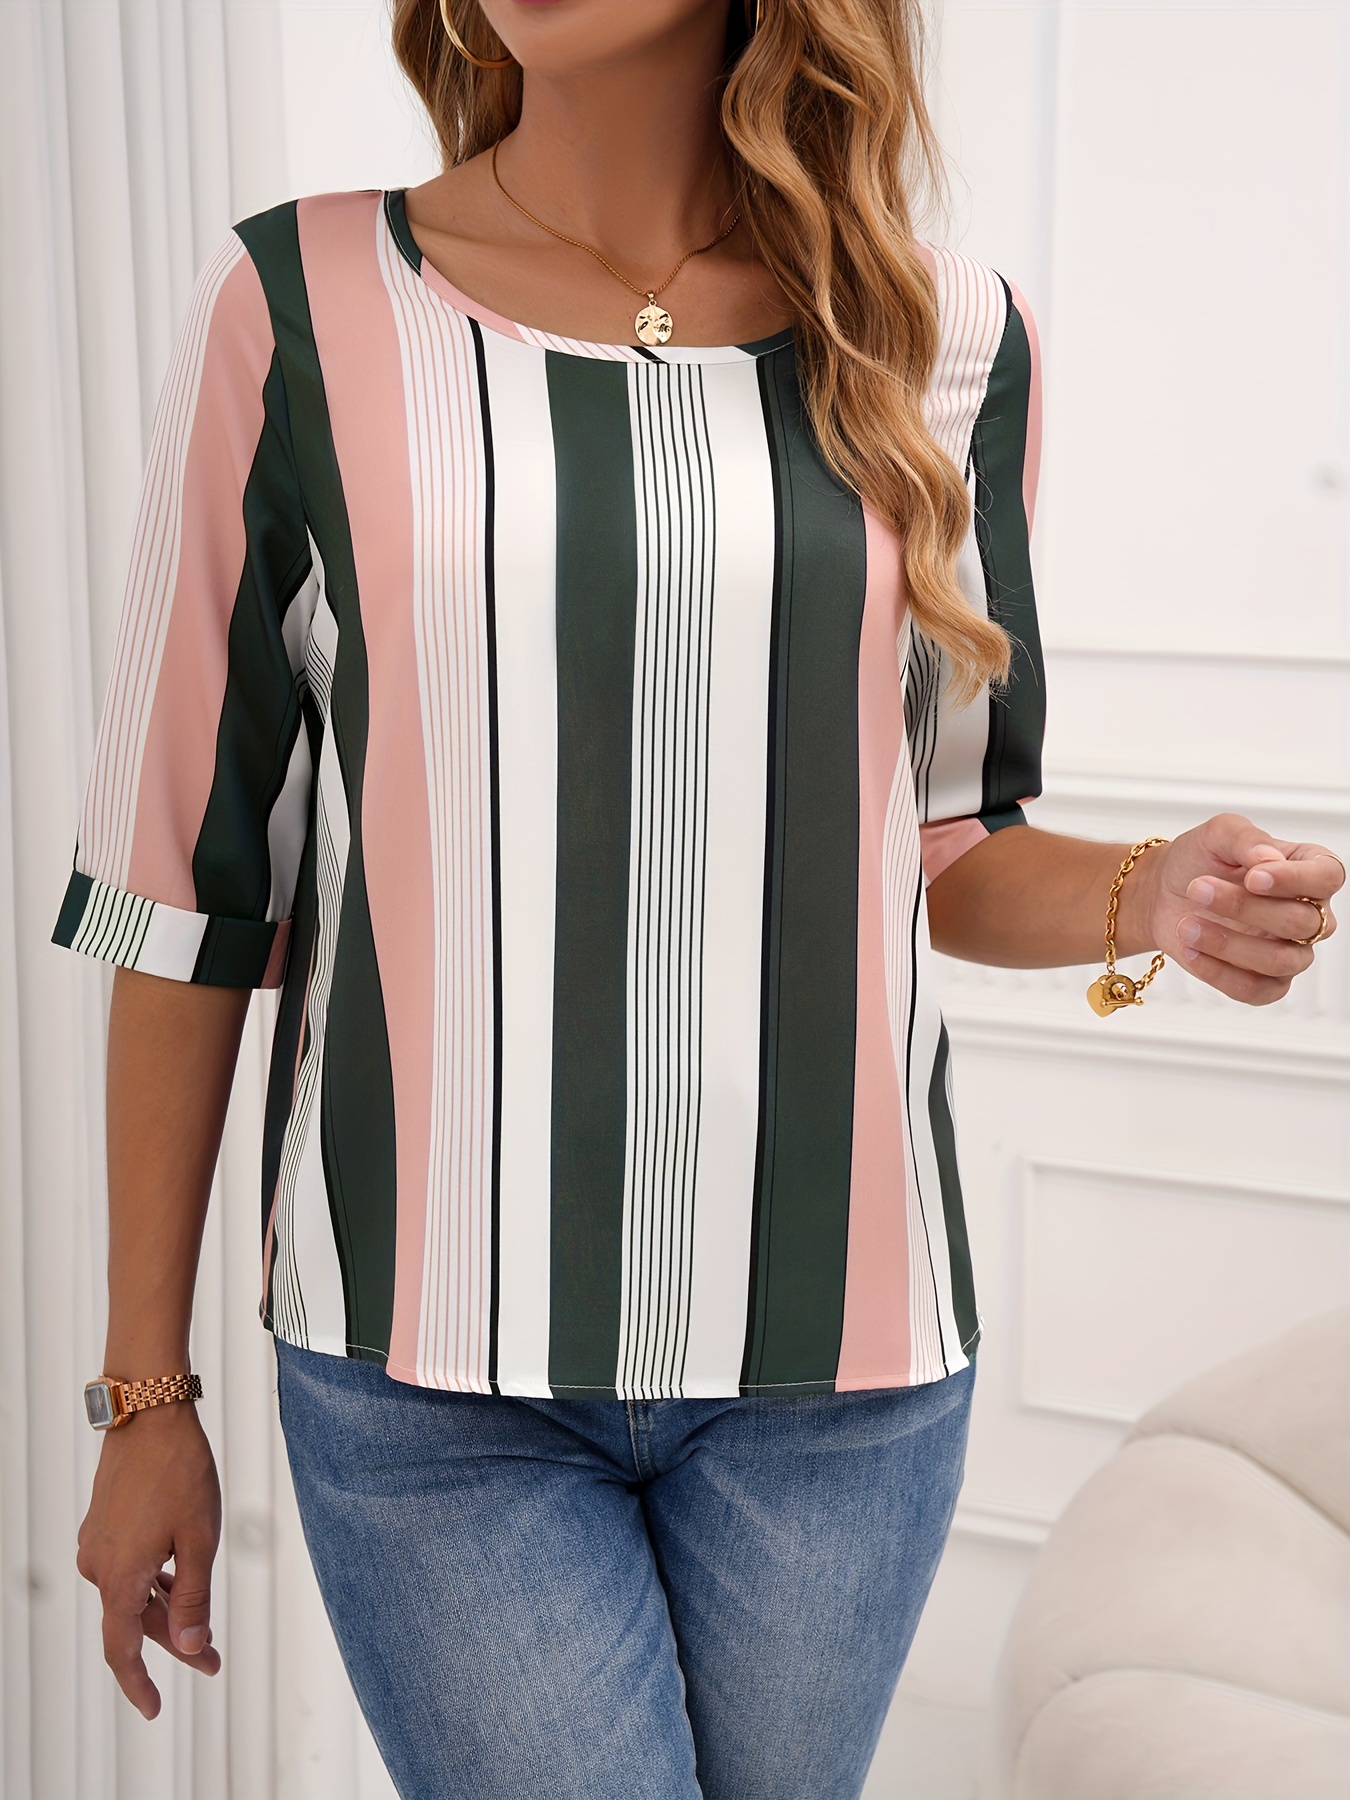 RQYYD Clearance Womens Tops Stripe Tees Casual 3/4 Sleeve Blouse